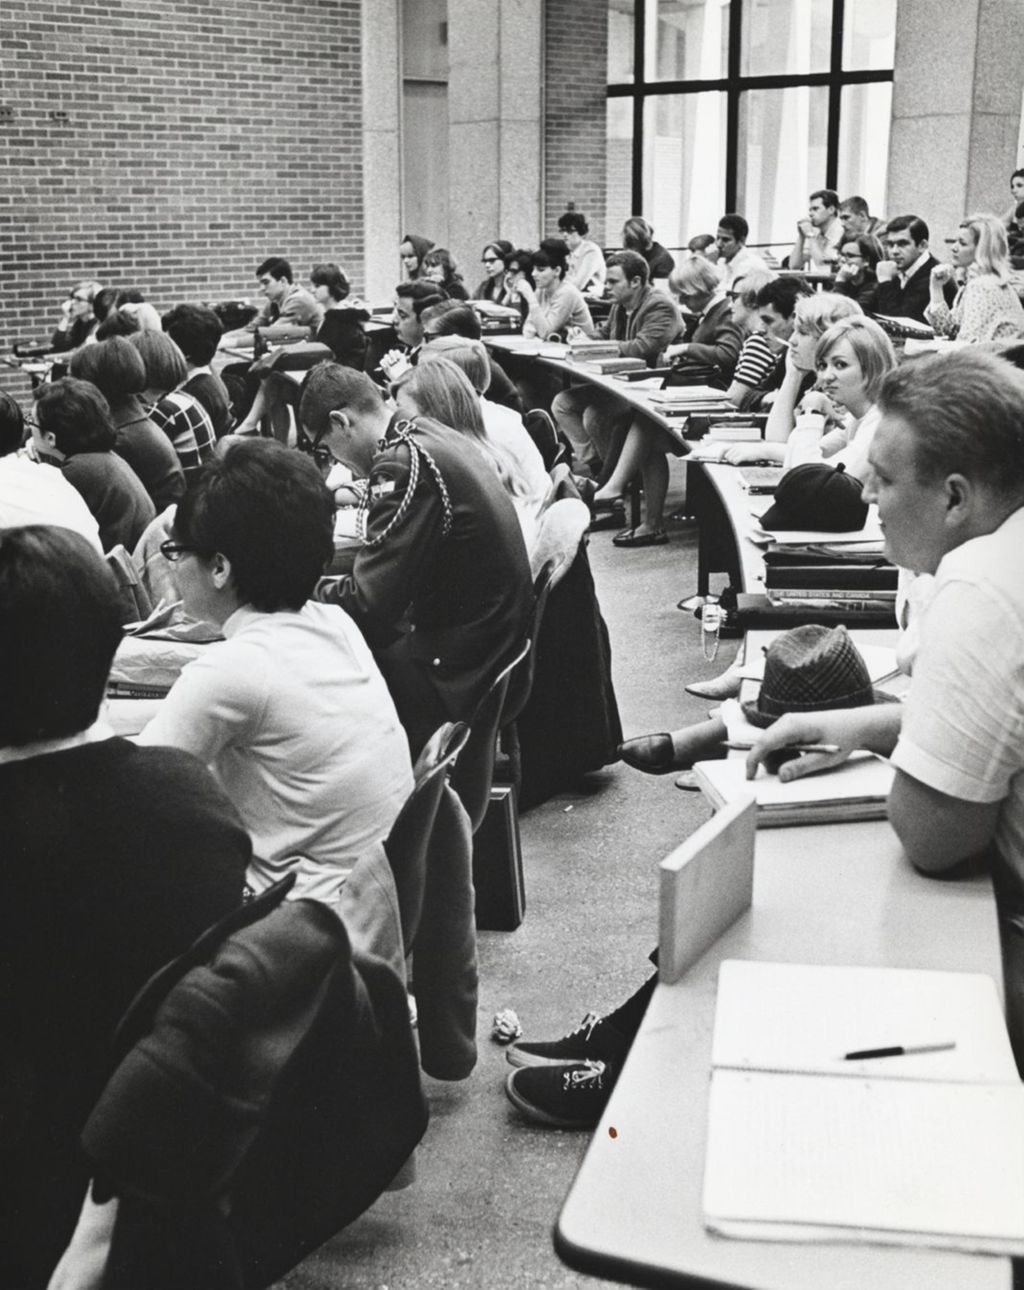 Students sitting in a lecture auditorium